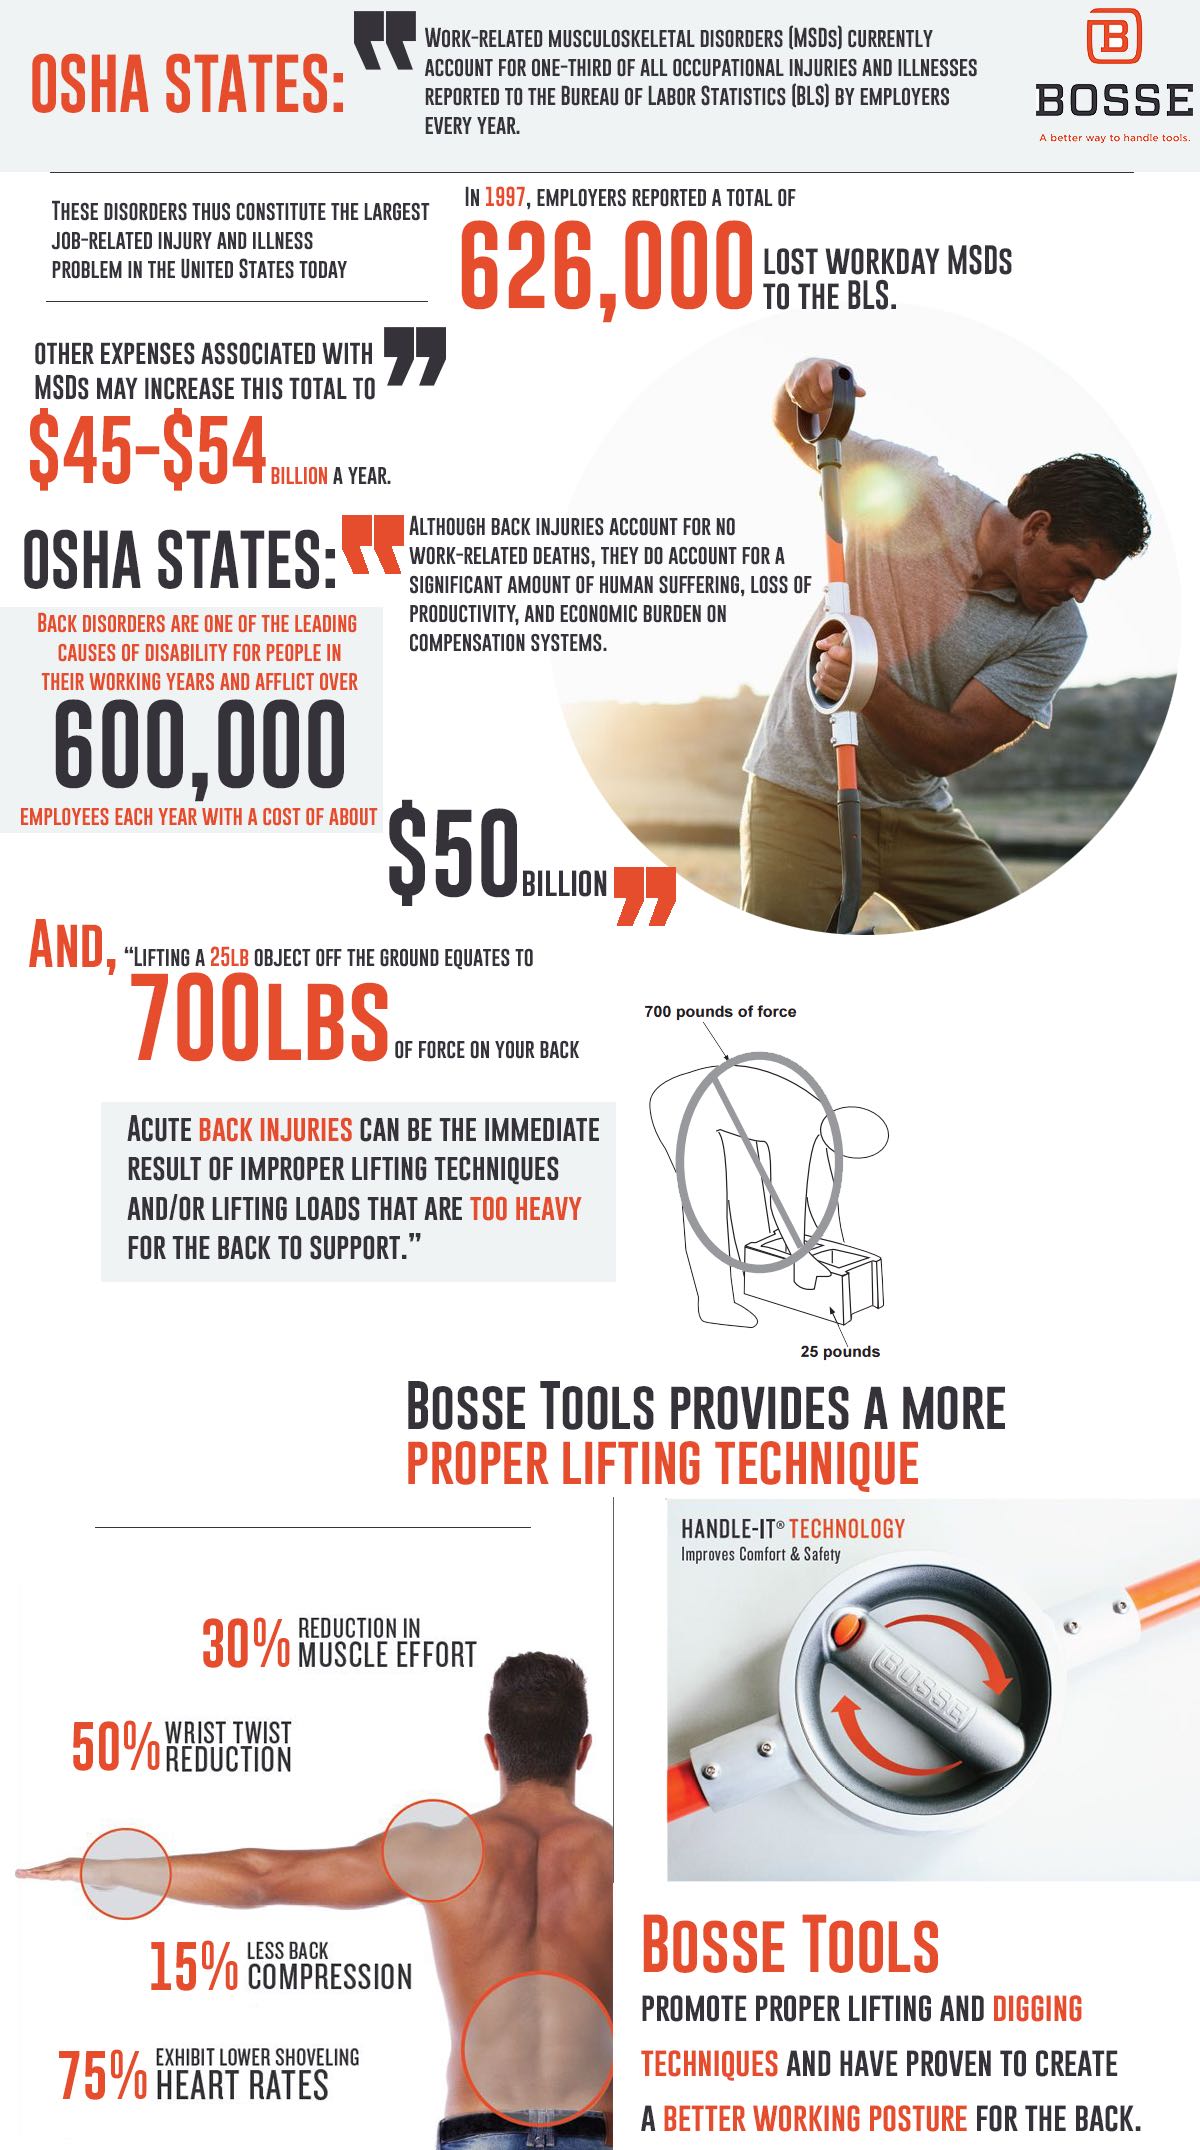 According to the Occupational Safety and Health Administration, OSHA, workplace injuries cost America over 50 billion dollars annually, and additionally detract 5 million hours of work.